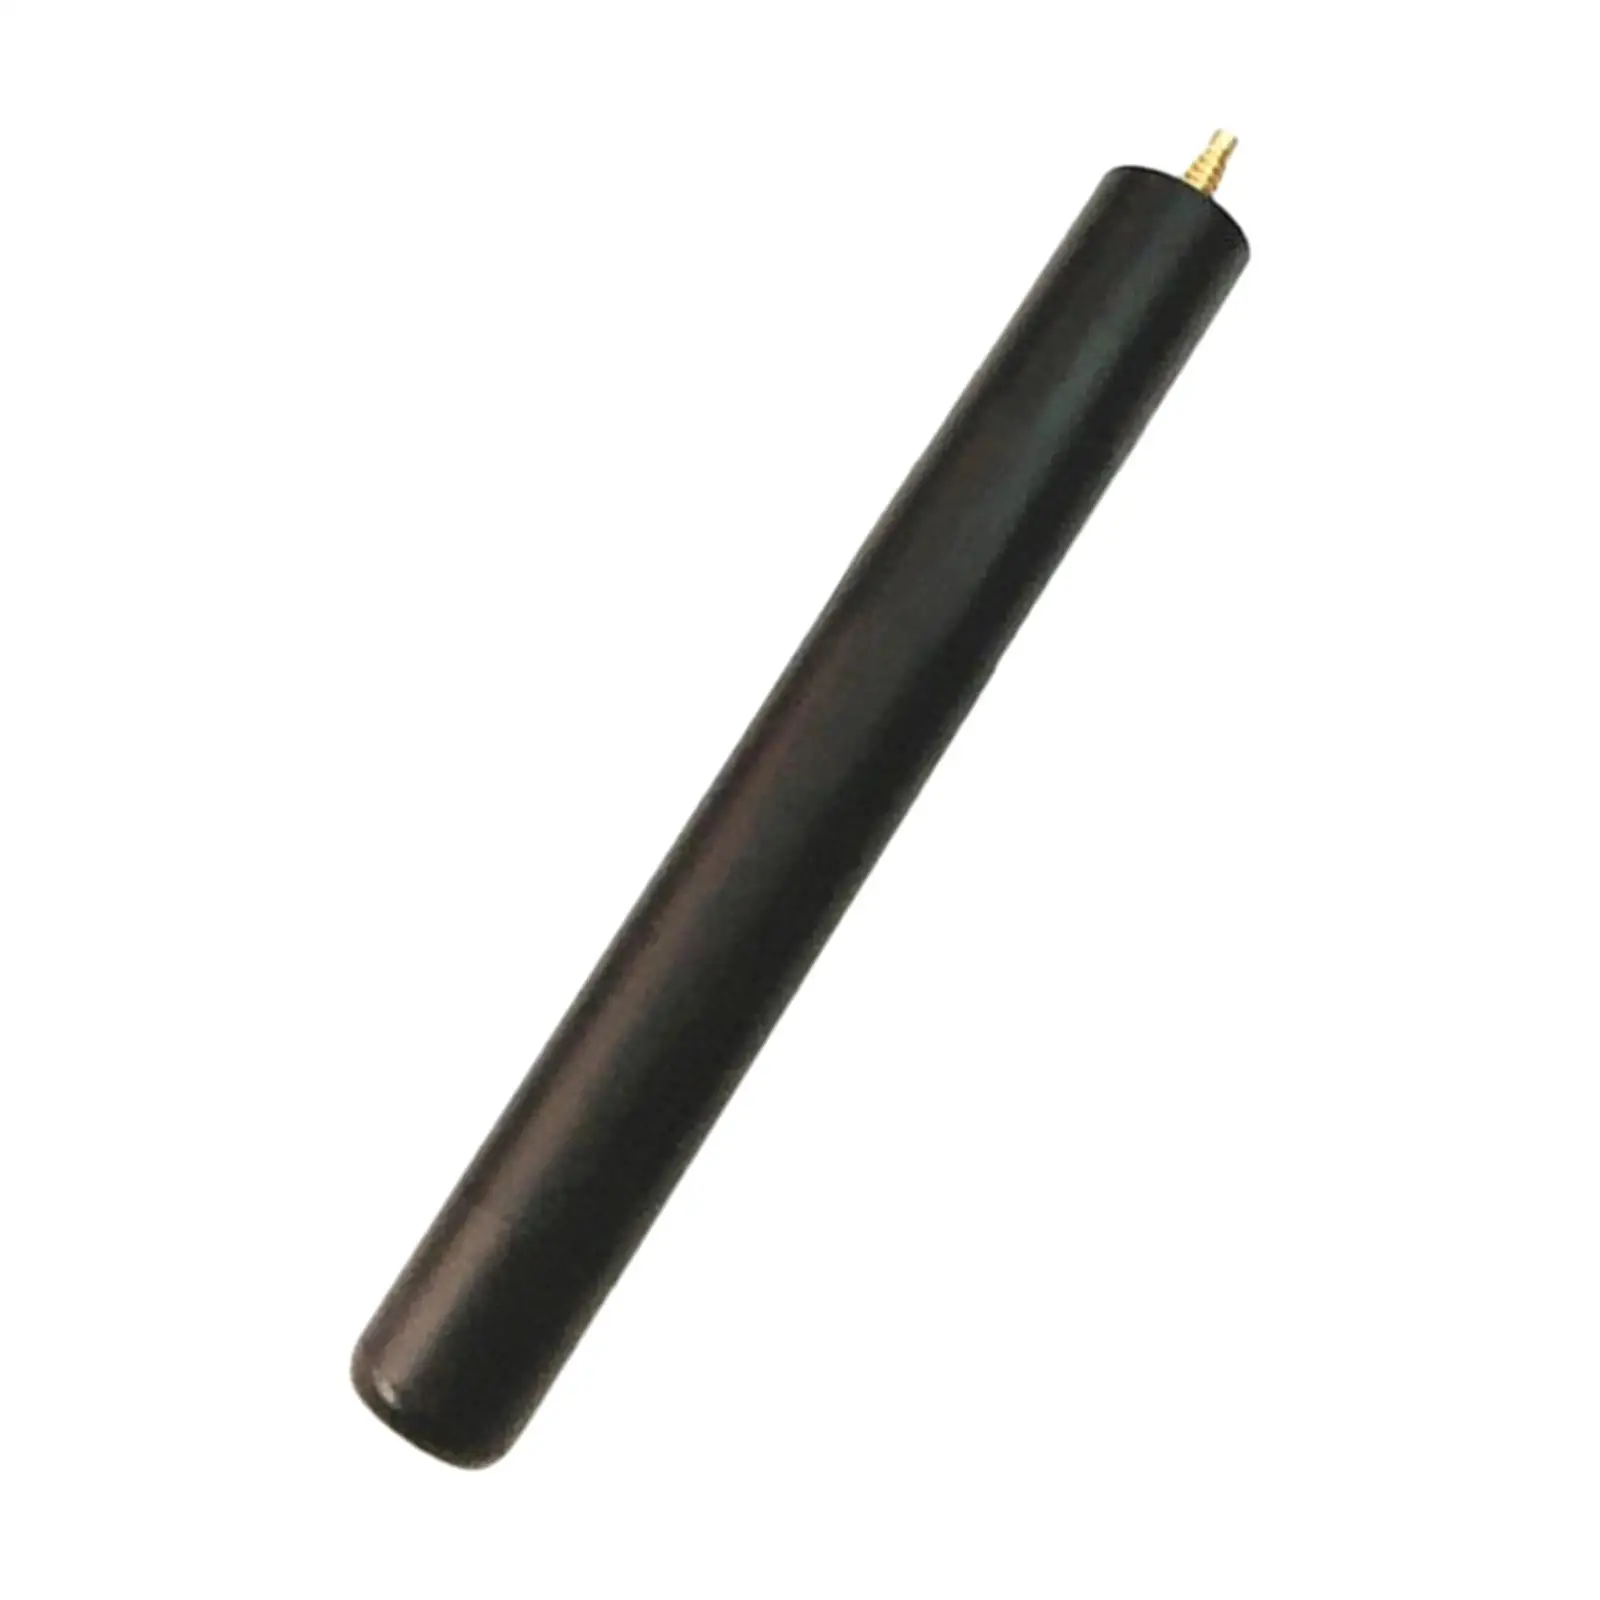 Billiard Pool Extension, Cue End Lengthener Attachment Pool Cue Extension for